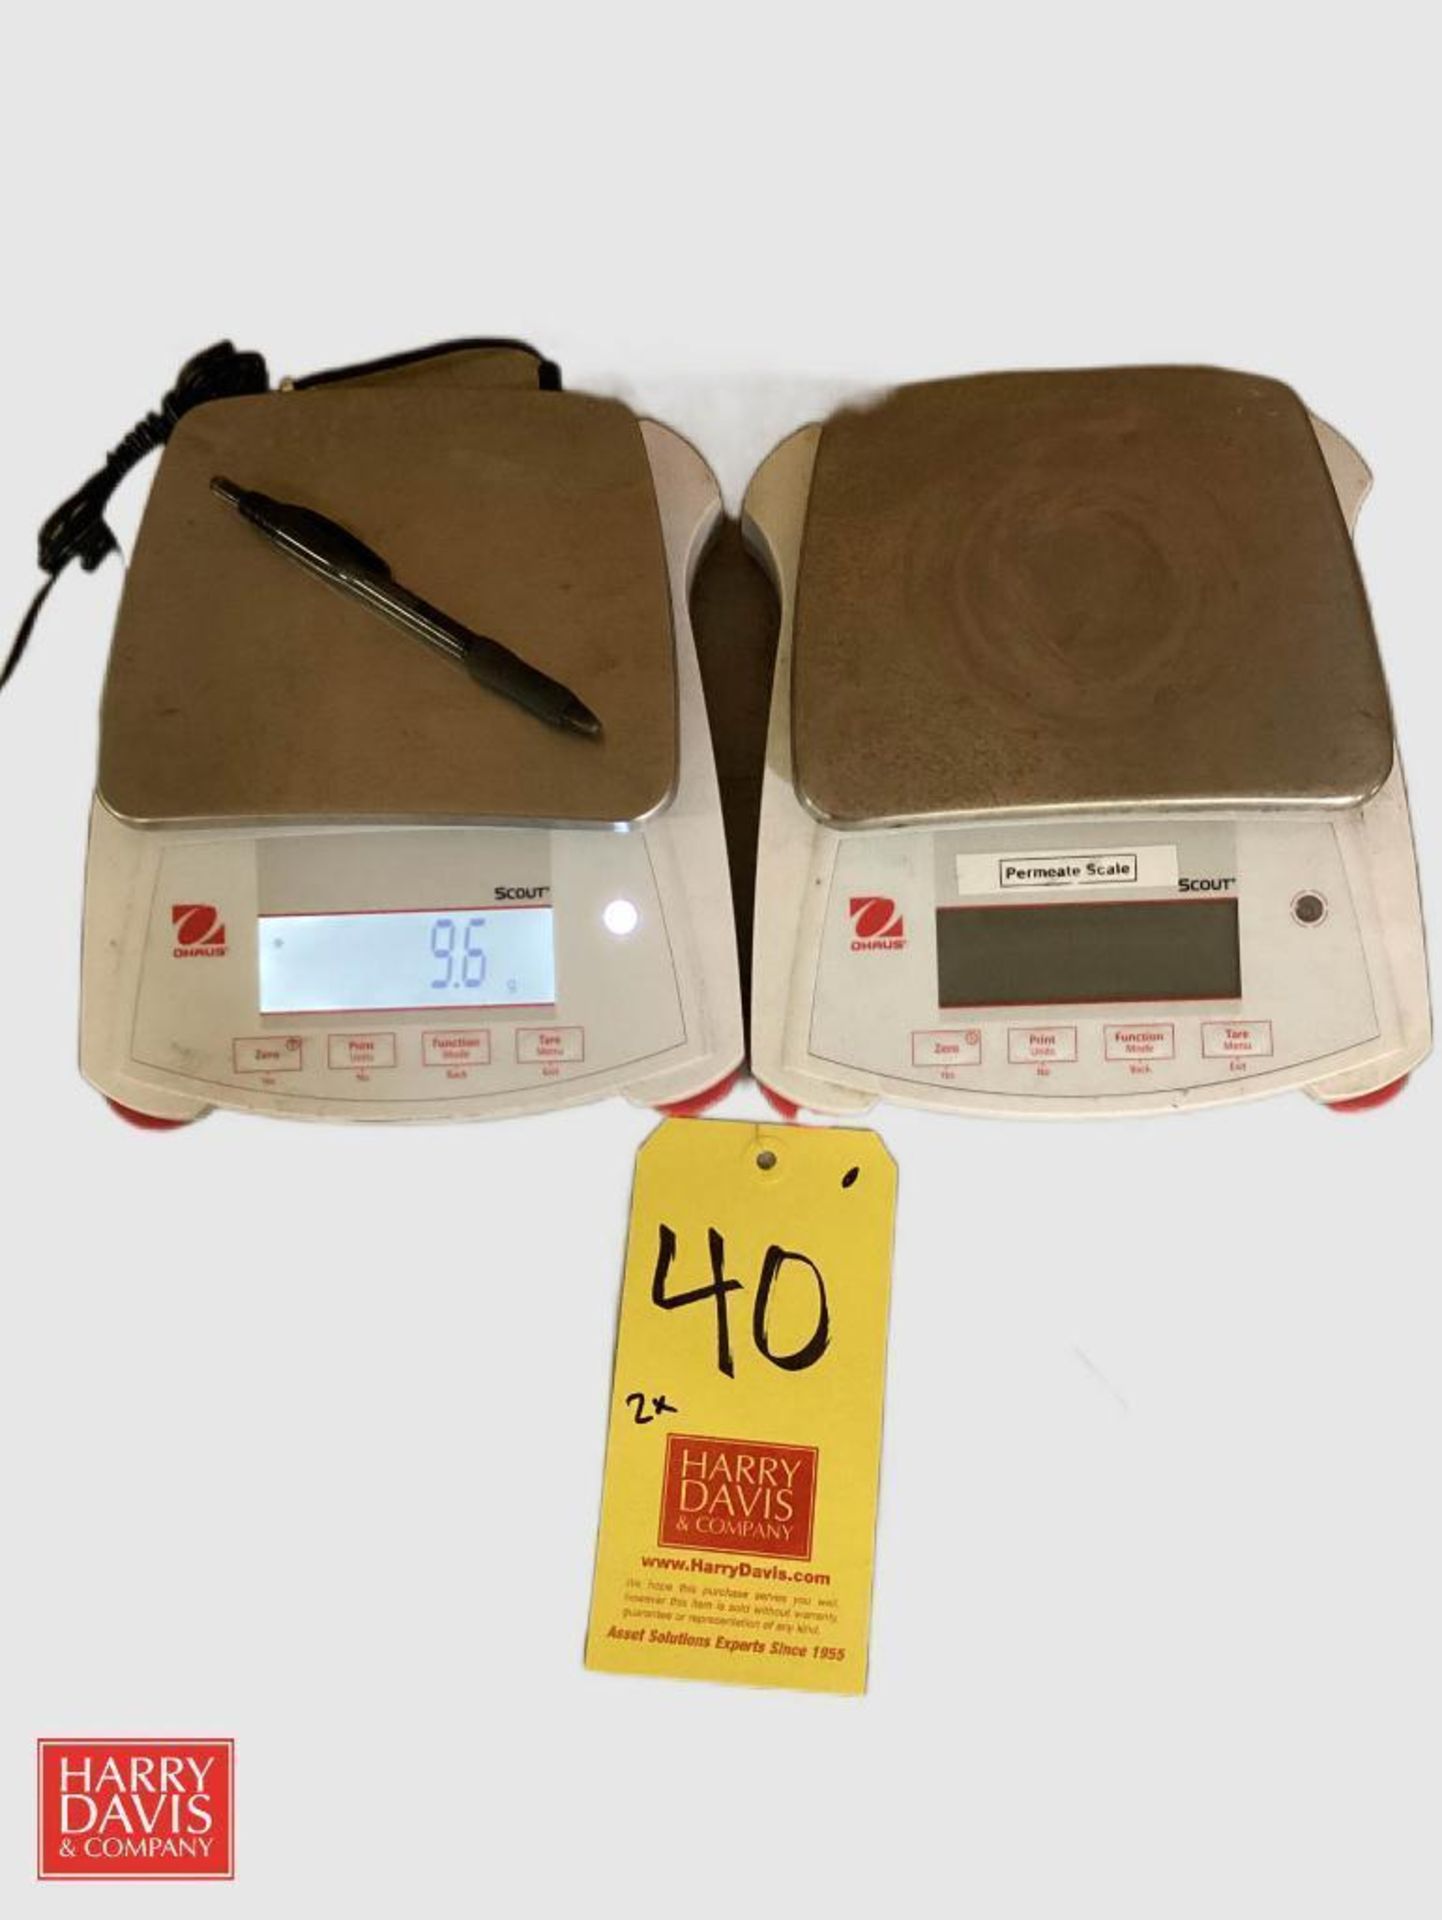 Ohaus Scout SPX6201 Digital Laboratory Scale